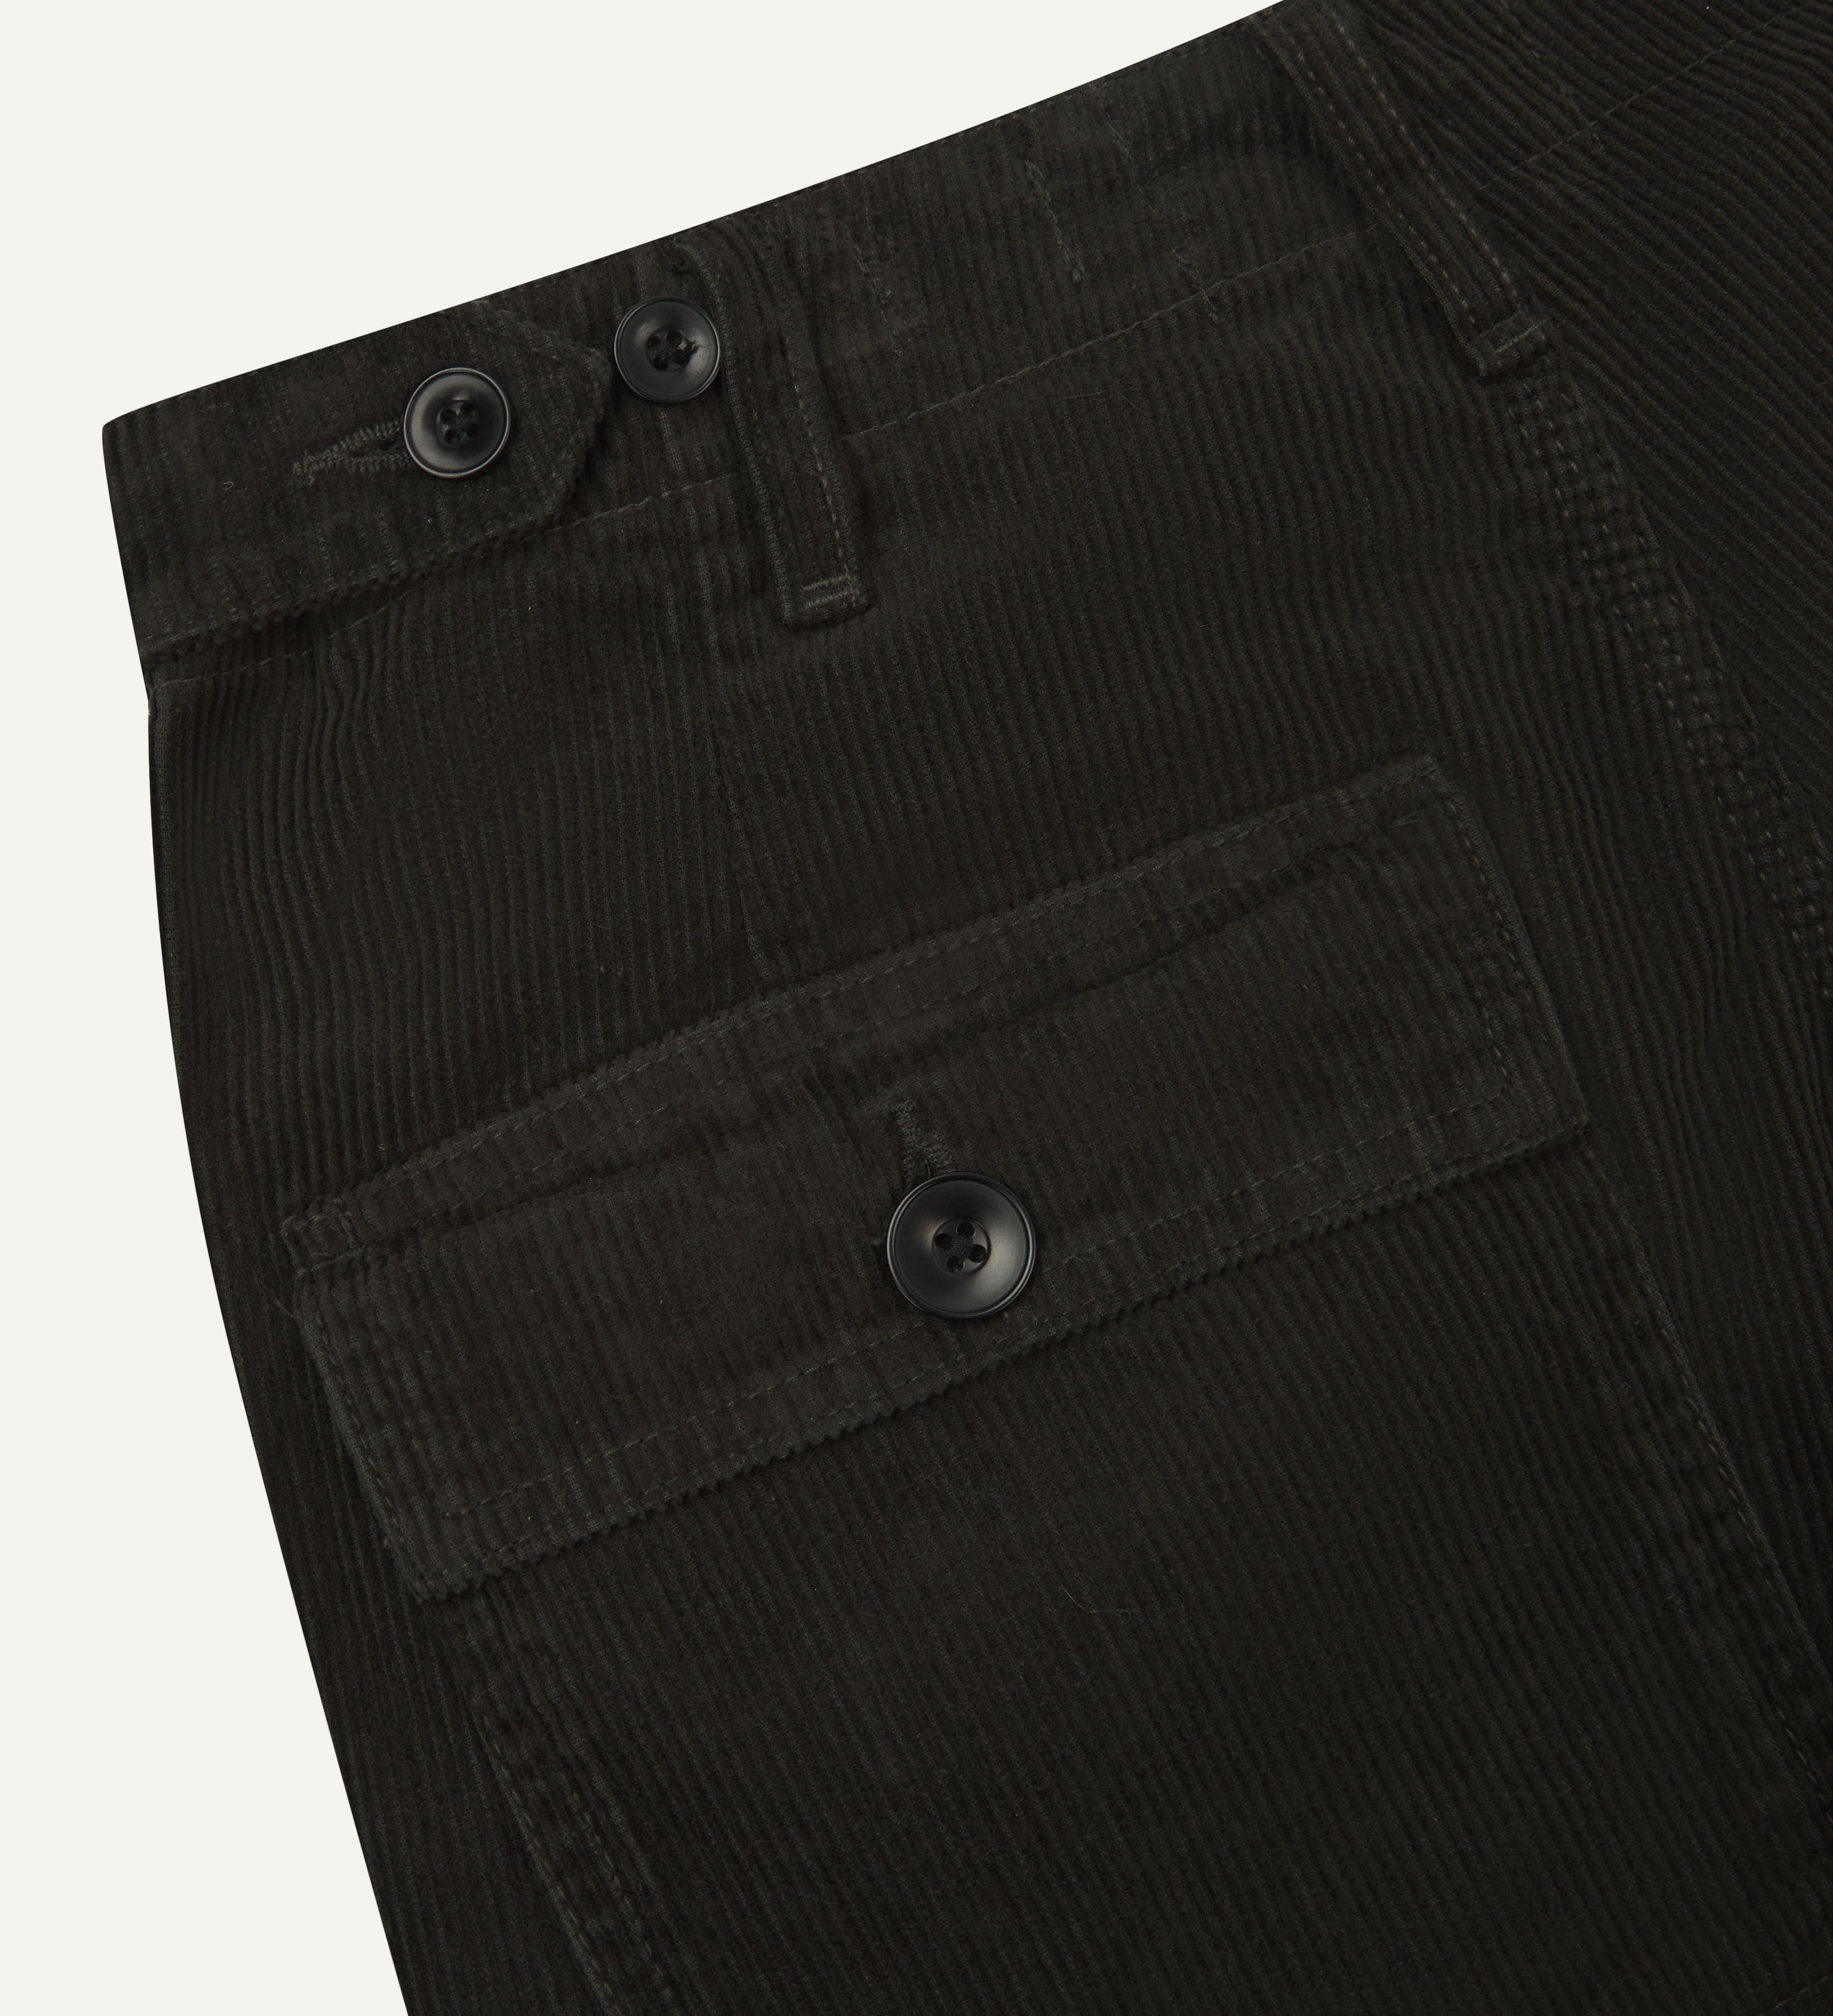 Angled, close-up view of Uskees faded-black corduroy work pants with focus on natural corozo buttons, left rear pocket, belt loops, triple stitching and adjustable button waist.